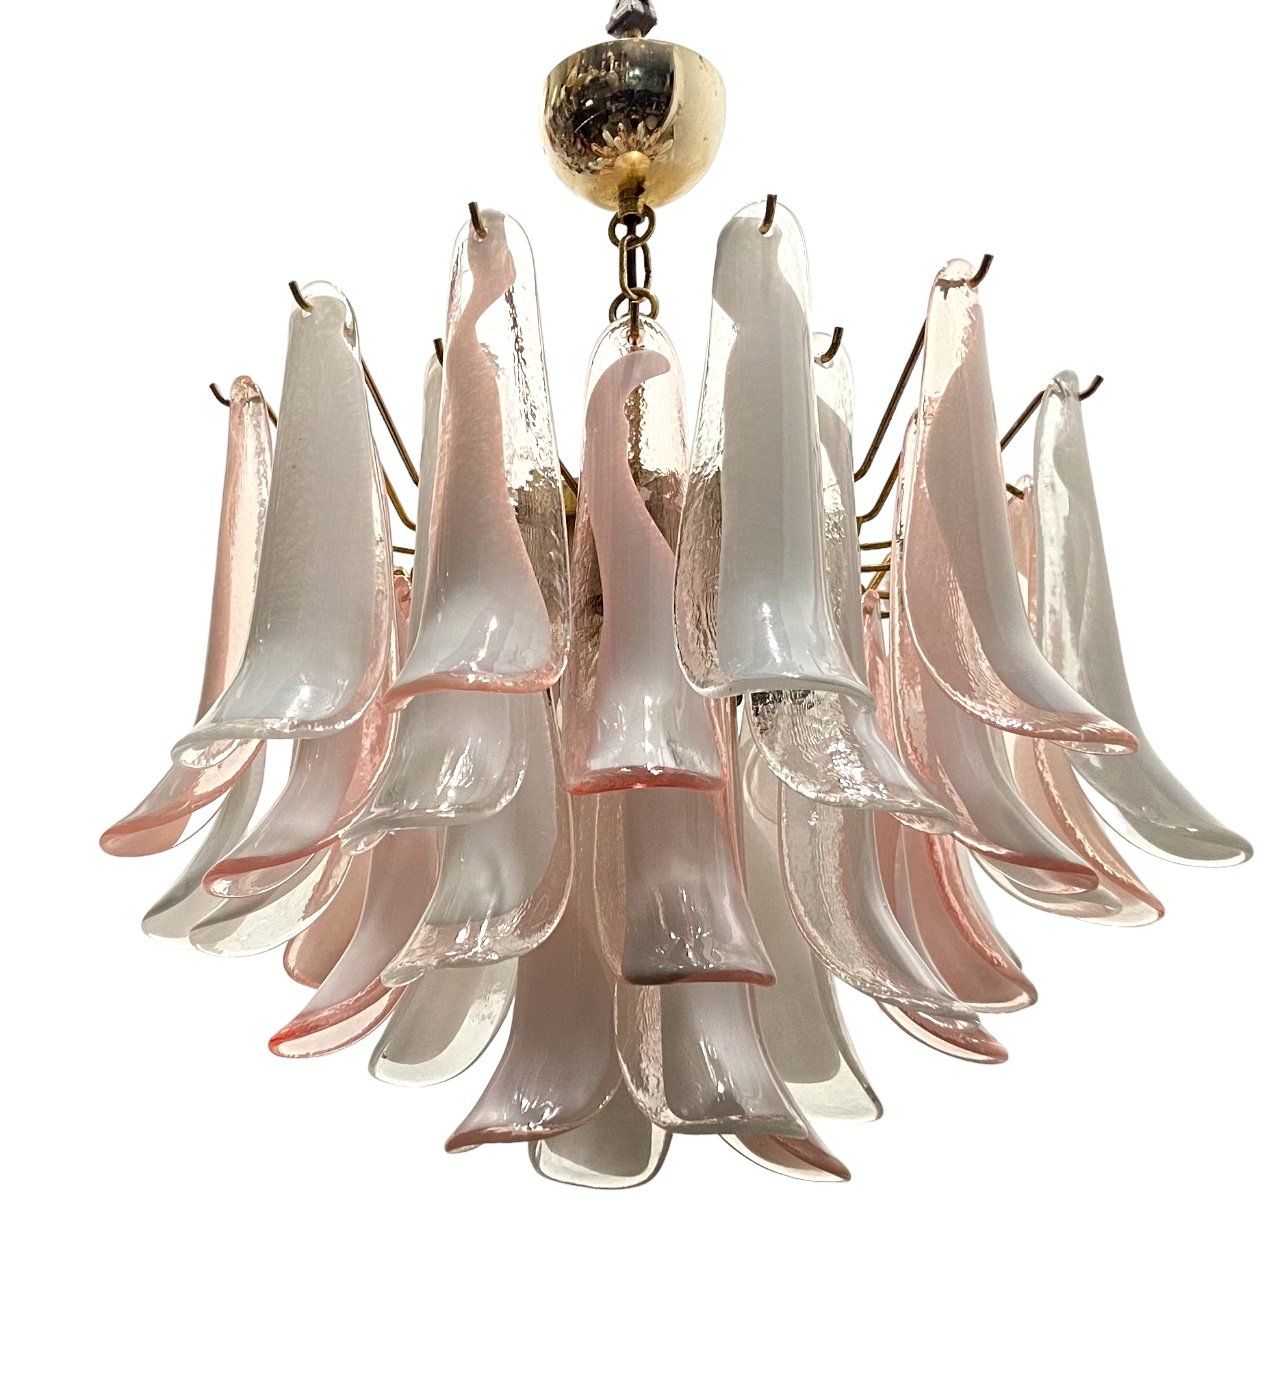 Pink and White Murano Glass Petal Chandelier, 1970s